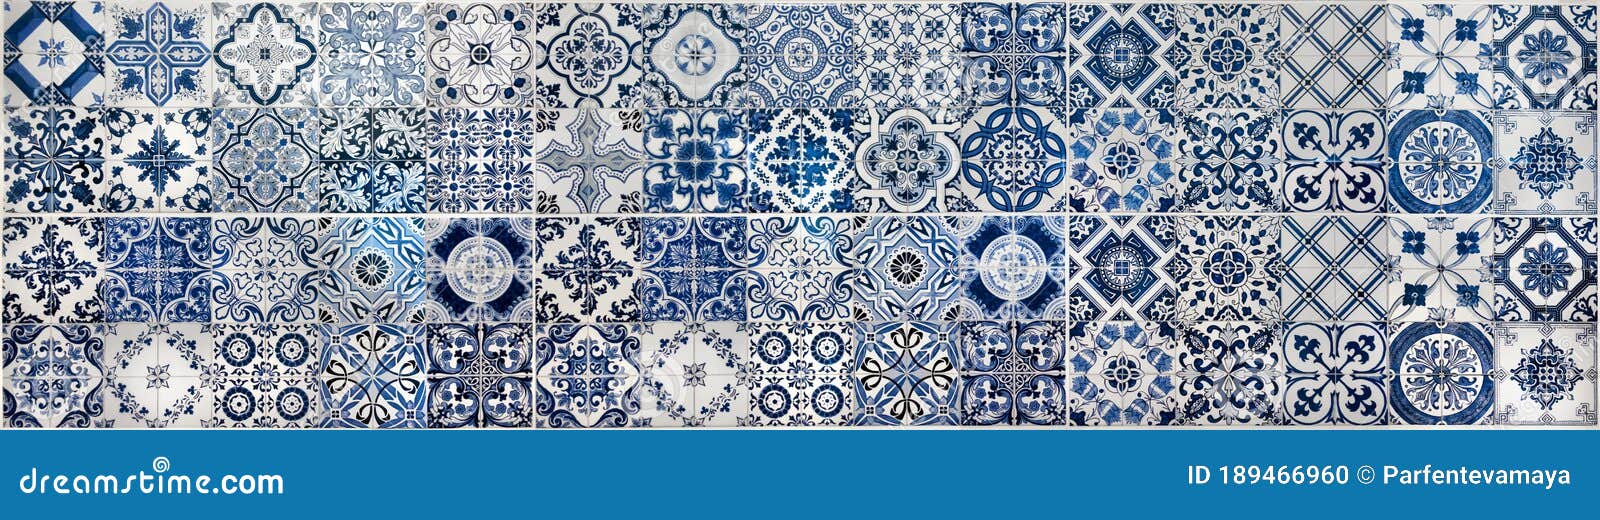 geometric and floral azulejo tile mosaic pattern. portuguese or spanish retro old wall tiles. seamless navy blue background.